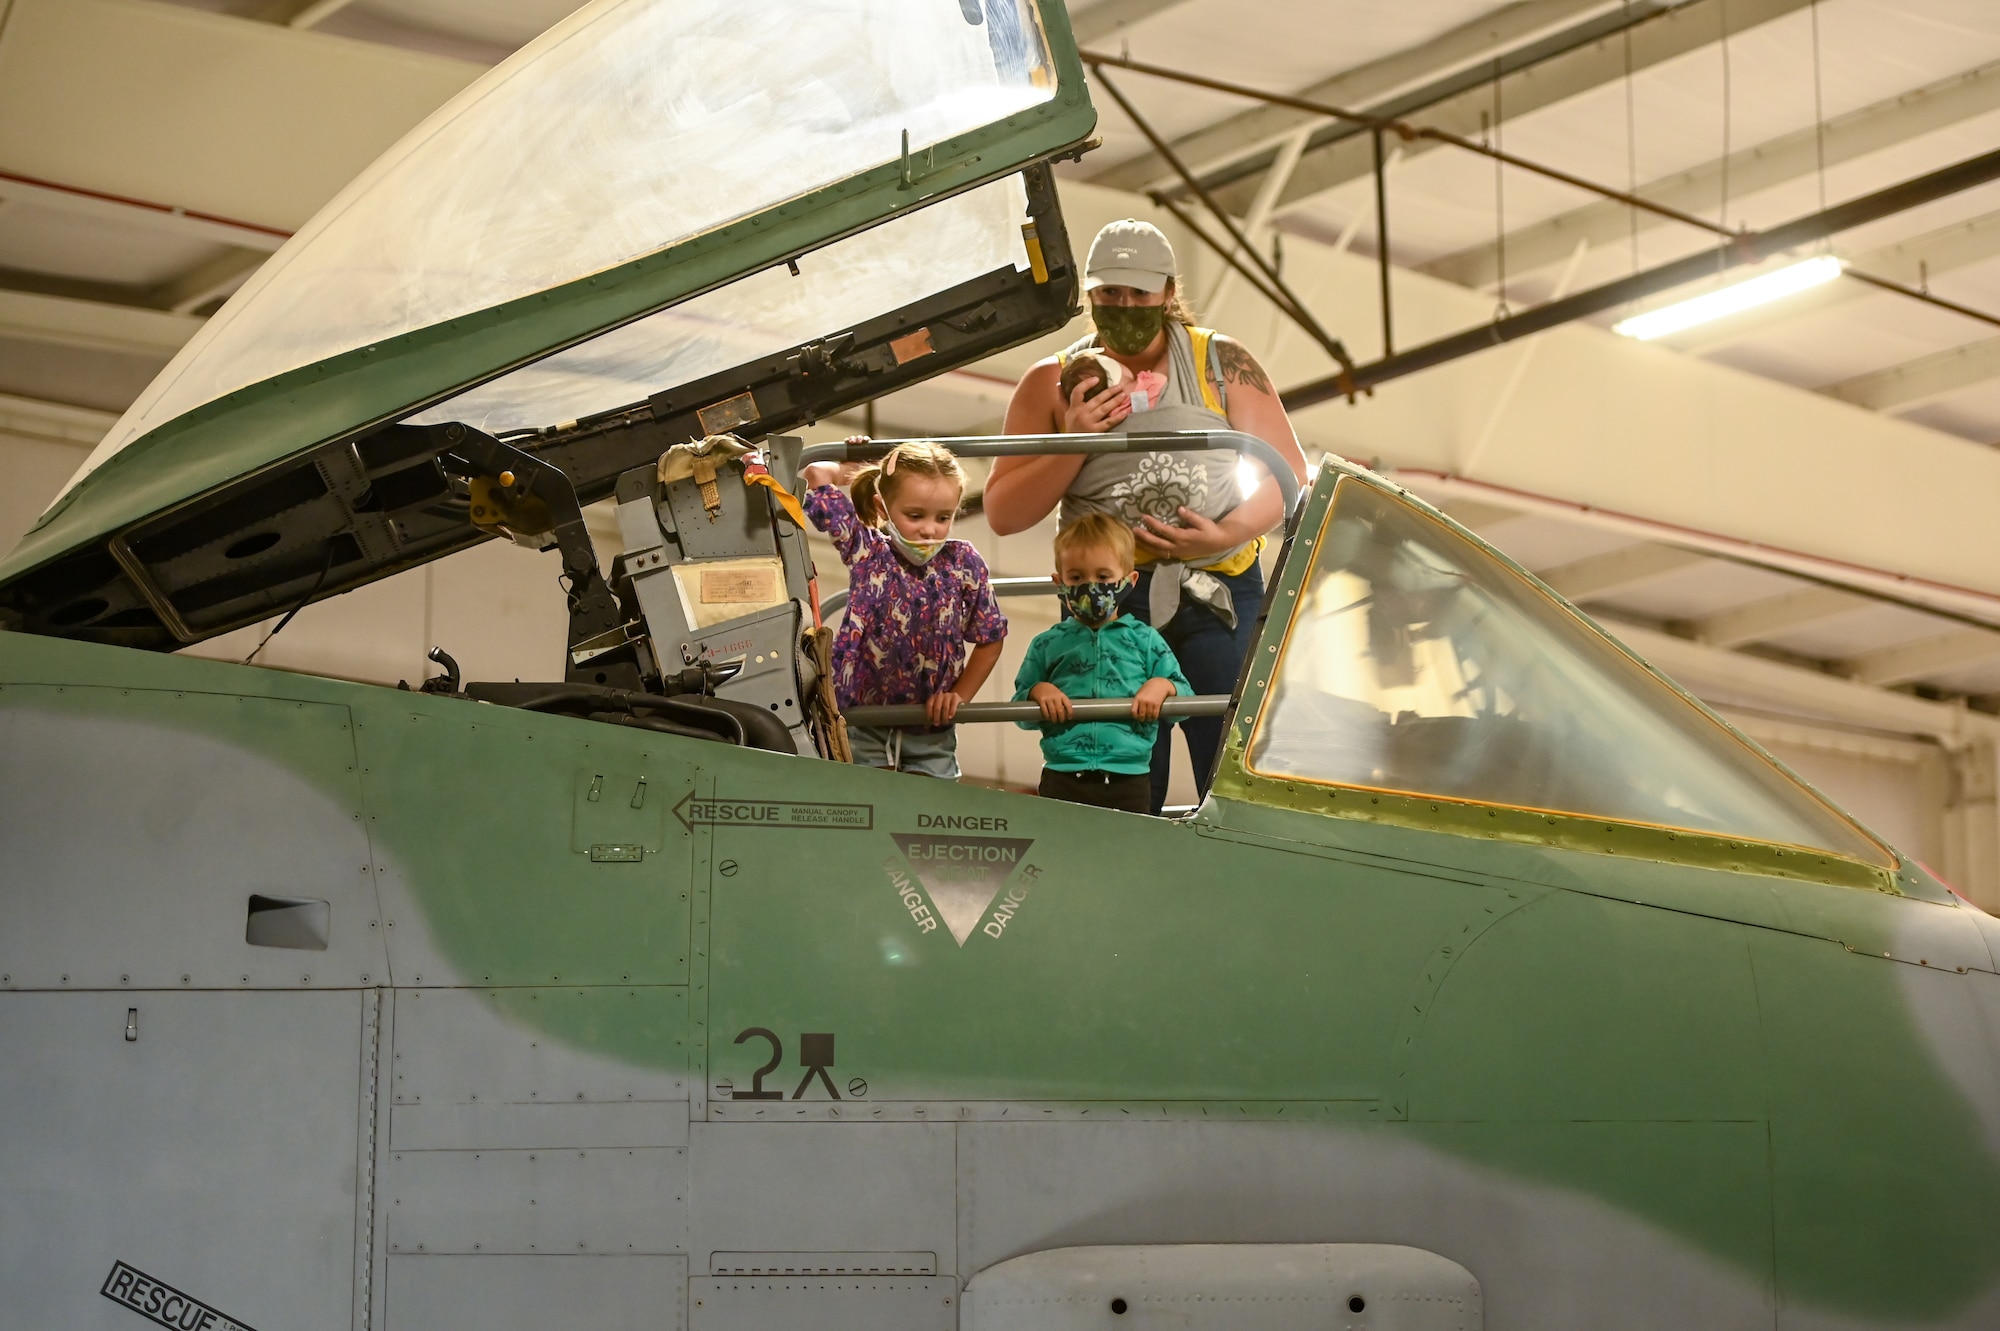 The Dunton family from Layton peer into the cockpit of an A-10 Thunderbolt II while visiting Hill Aerospace Museum Sept. 16, 2021, at Hill Air Force Base, Utah. The museum is offering special programs and exhibits during Top of Utah Museum Week, which runs through Sept. 18. (U.S. Air Force photo by Cynthia Griggs)